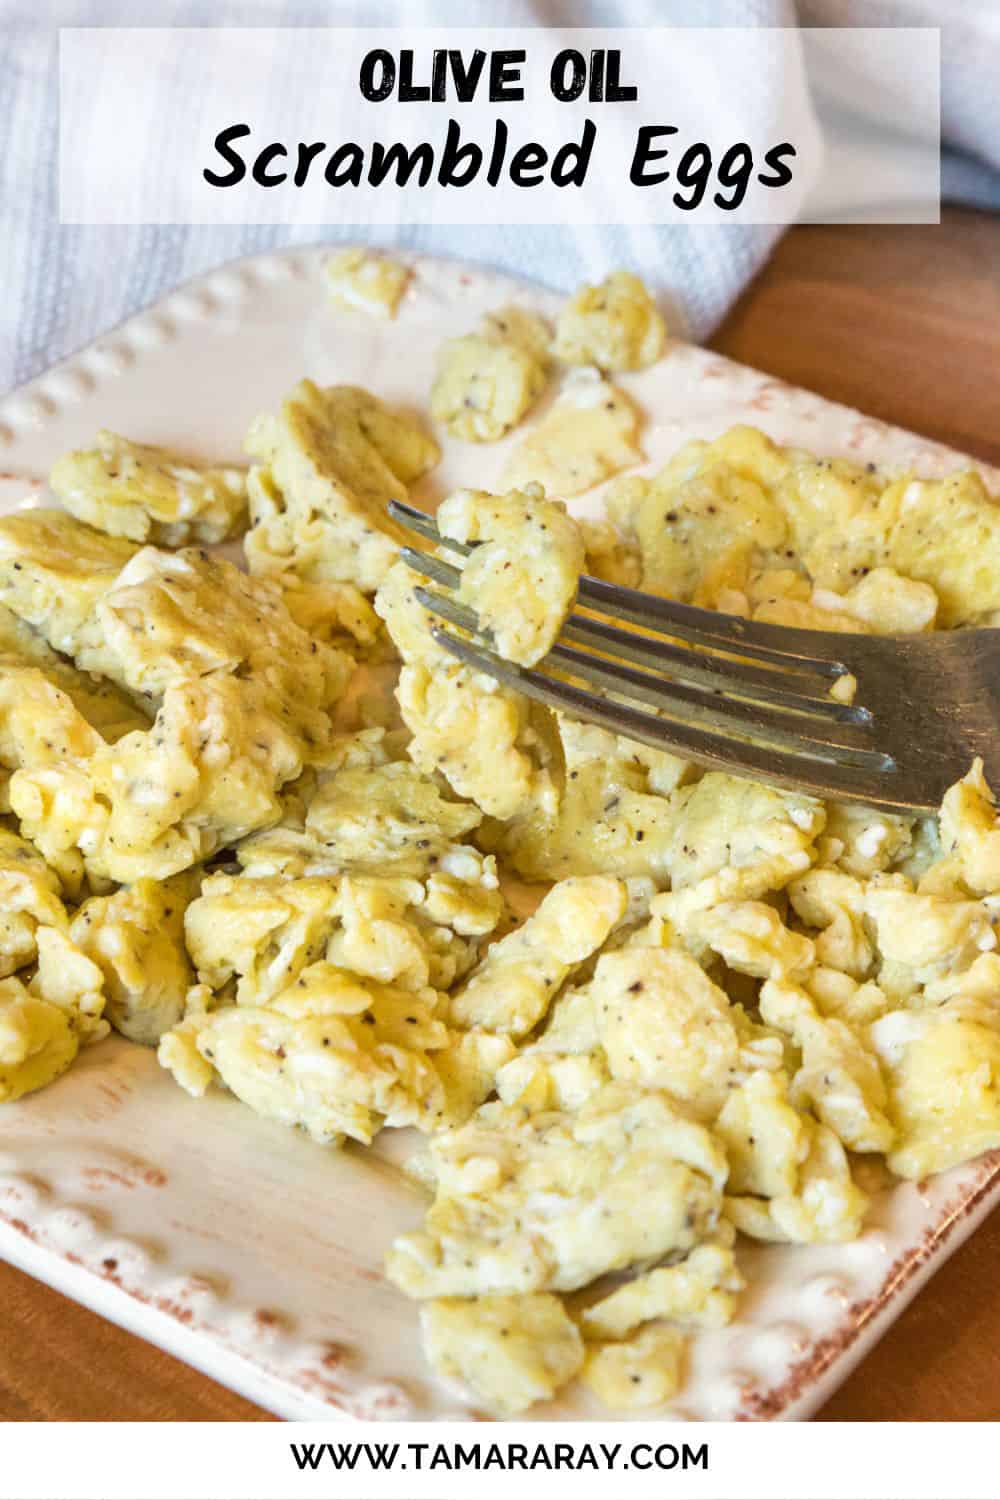 Olive oil scrambled eggs on a plate.